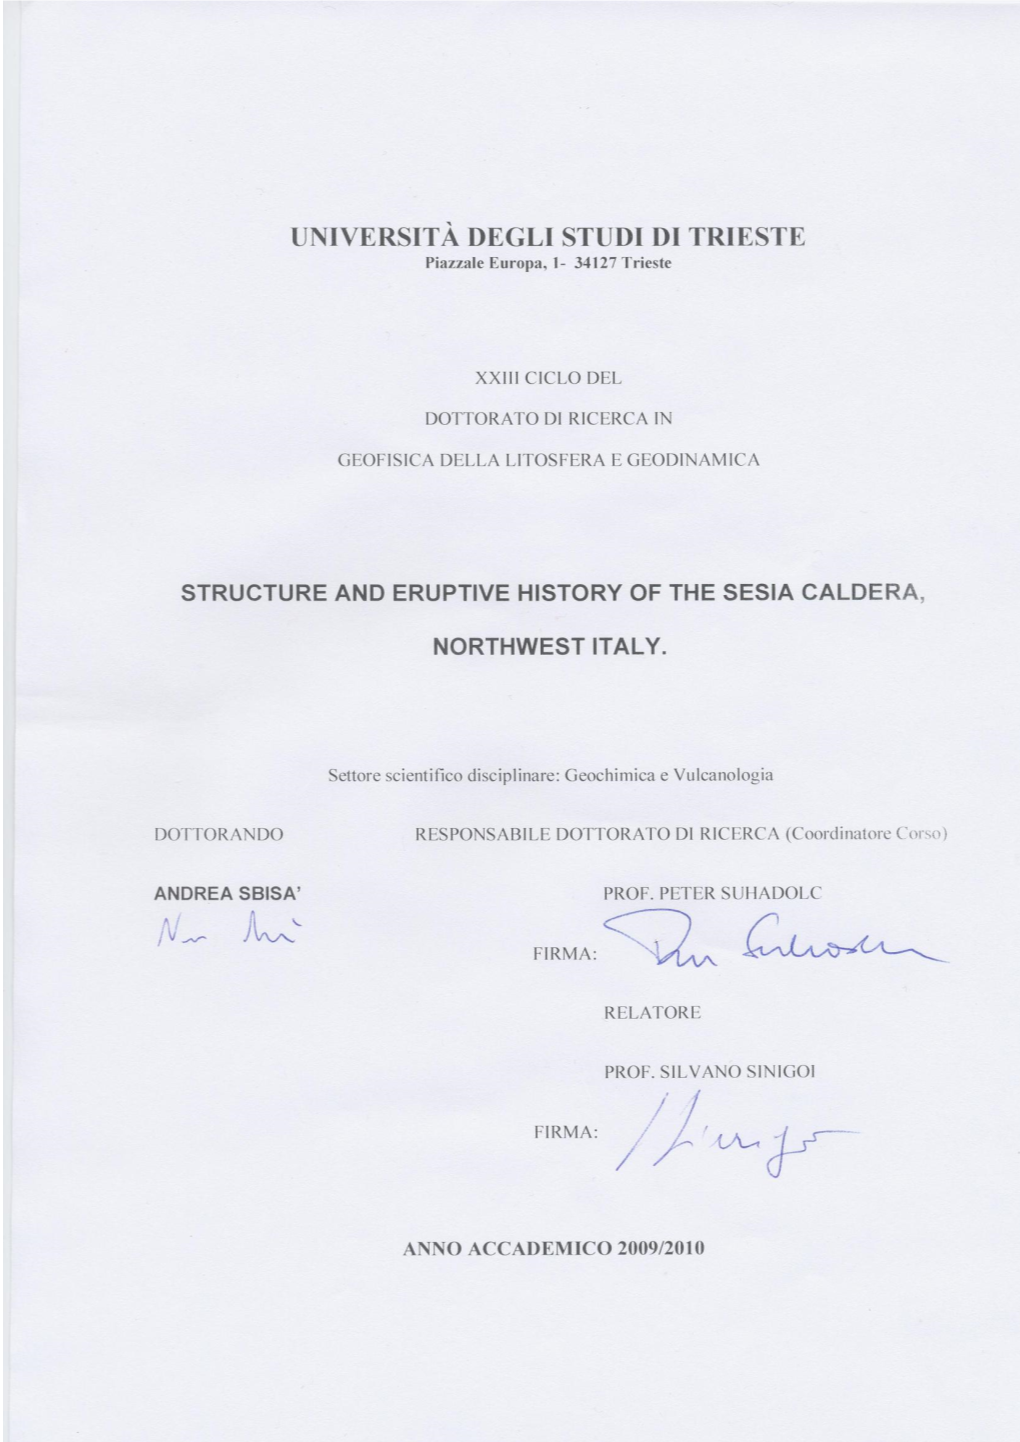 Phd Thesis of Andrea Sbisà